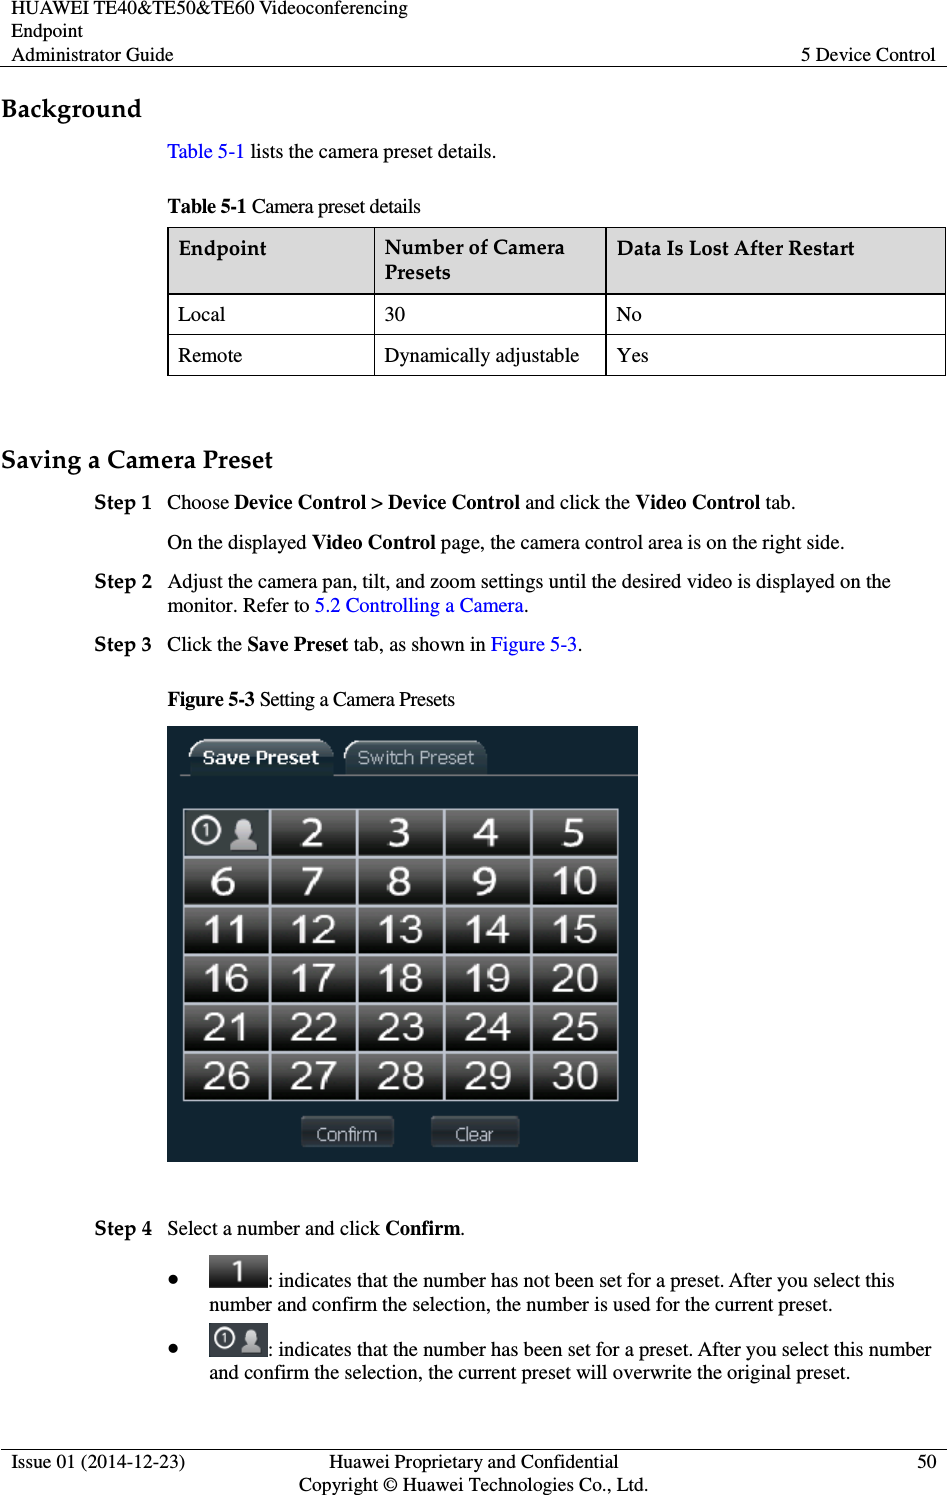 HUAWEI TE40&amp;TE50&amp;TE60 Videoconferencing Endpoint Administrator Guide  5 Device Control  Issue 01 (2014-12-23)  Huawei Proprietary and Confidential                                     Copyright © Huawei Technologies Co., Ltd. 50  Background Table 5-1 lists the camera preset details.   Table 5-1 Camera preset details Endpoint  Number of Camera Presets Data Is Lost After Restart Local  30  No Remote  Dynamically adjustable  Yes  Saving a Camera Preset Step 1 Choose Device Control &gt; Device Control and click the Video Control tab. On the displayed Video Control page, the camera control area is on the right side. Step 2 Adjust the camera pan, tilt, and zoom settings until the desired video is displayed on the monitor. Refer to 5.2 Controlling a Camera.   Step 3 Click the Save Preset tab, as shown in Figure 5-3. Figure 5-3 Setting a Camera Presets   Step 4 Select a number and click Confirm.  : indicates that the number has not been set for a preset. After you select this number and confirm the selection, the number is used for the current preset.  : indicates that the number has been set for a preset. After you select this number and confirm the selection, the current preset will overwrite the original preset. 